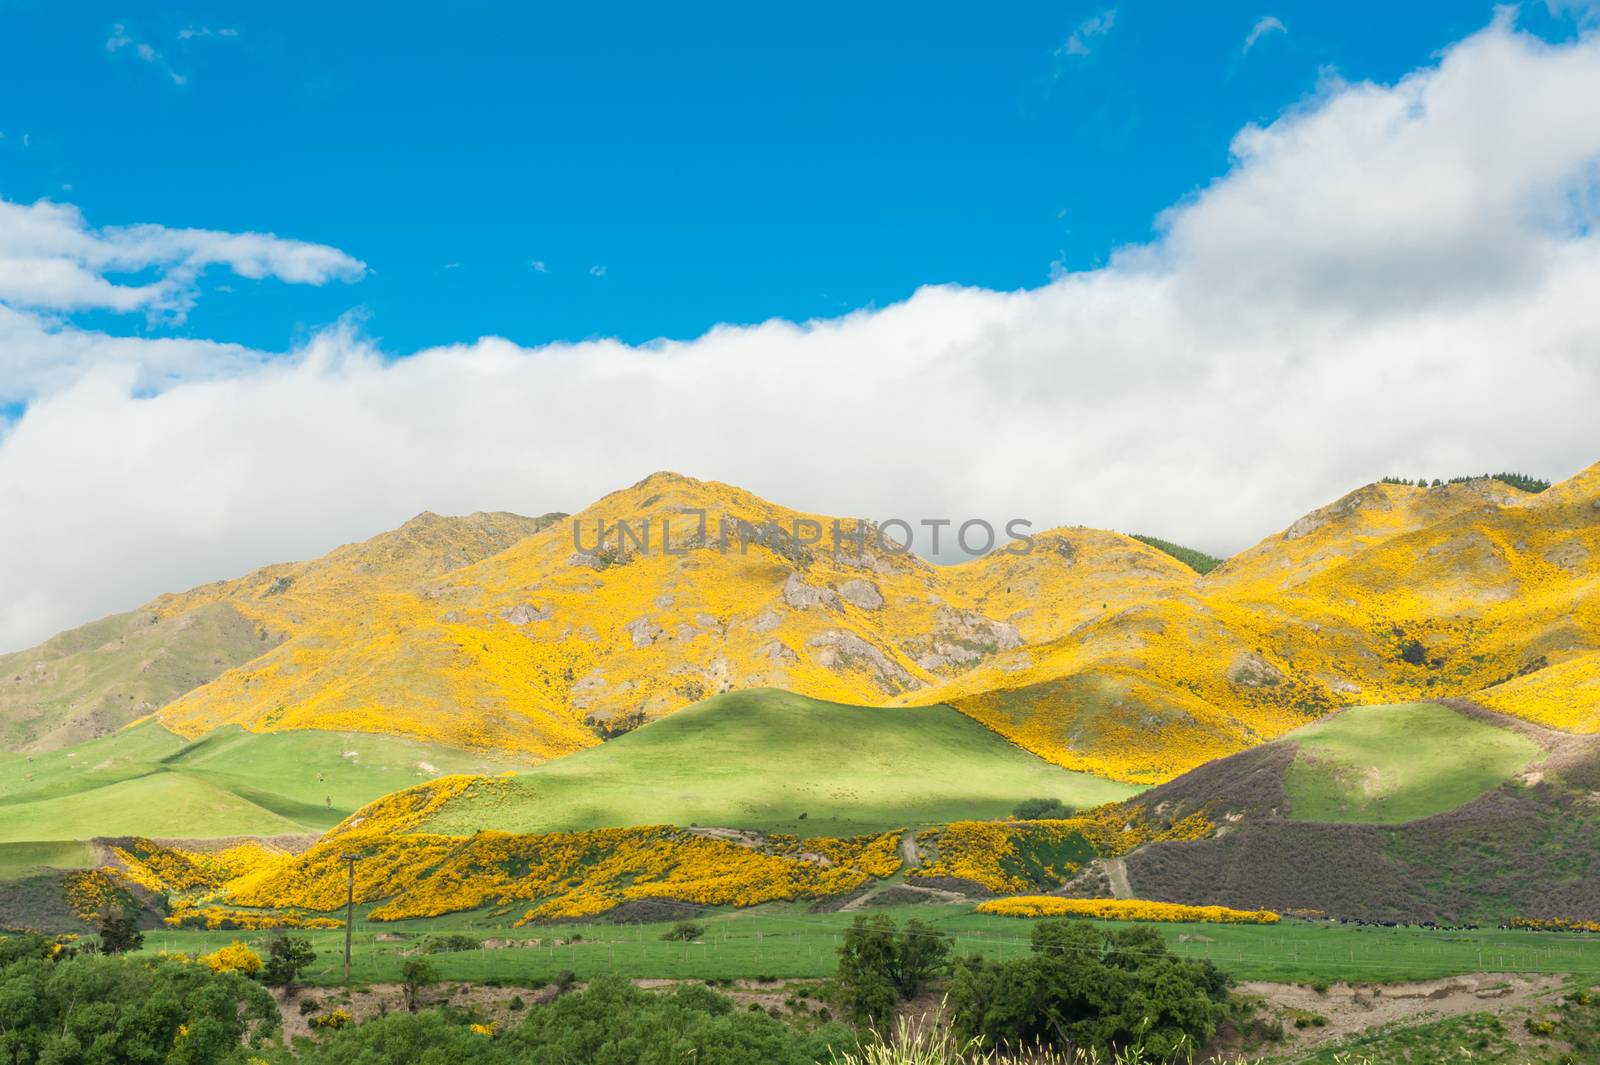 Beautiful mountains of New Zealand covered by blooming yellow gorse (Ulex europaeus)